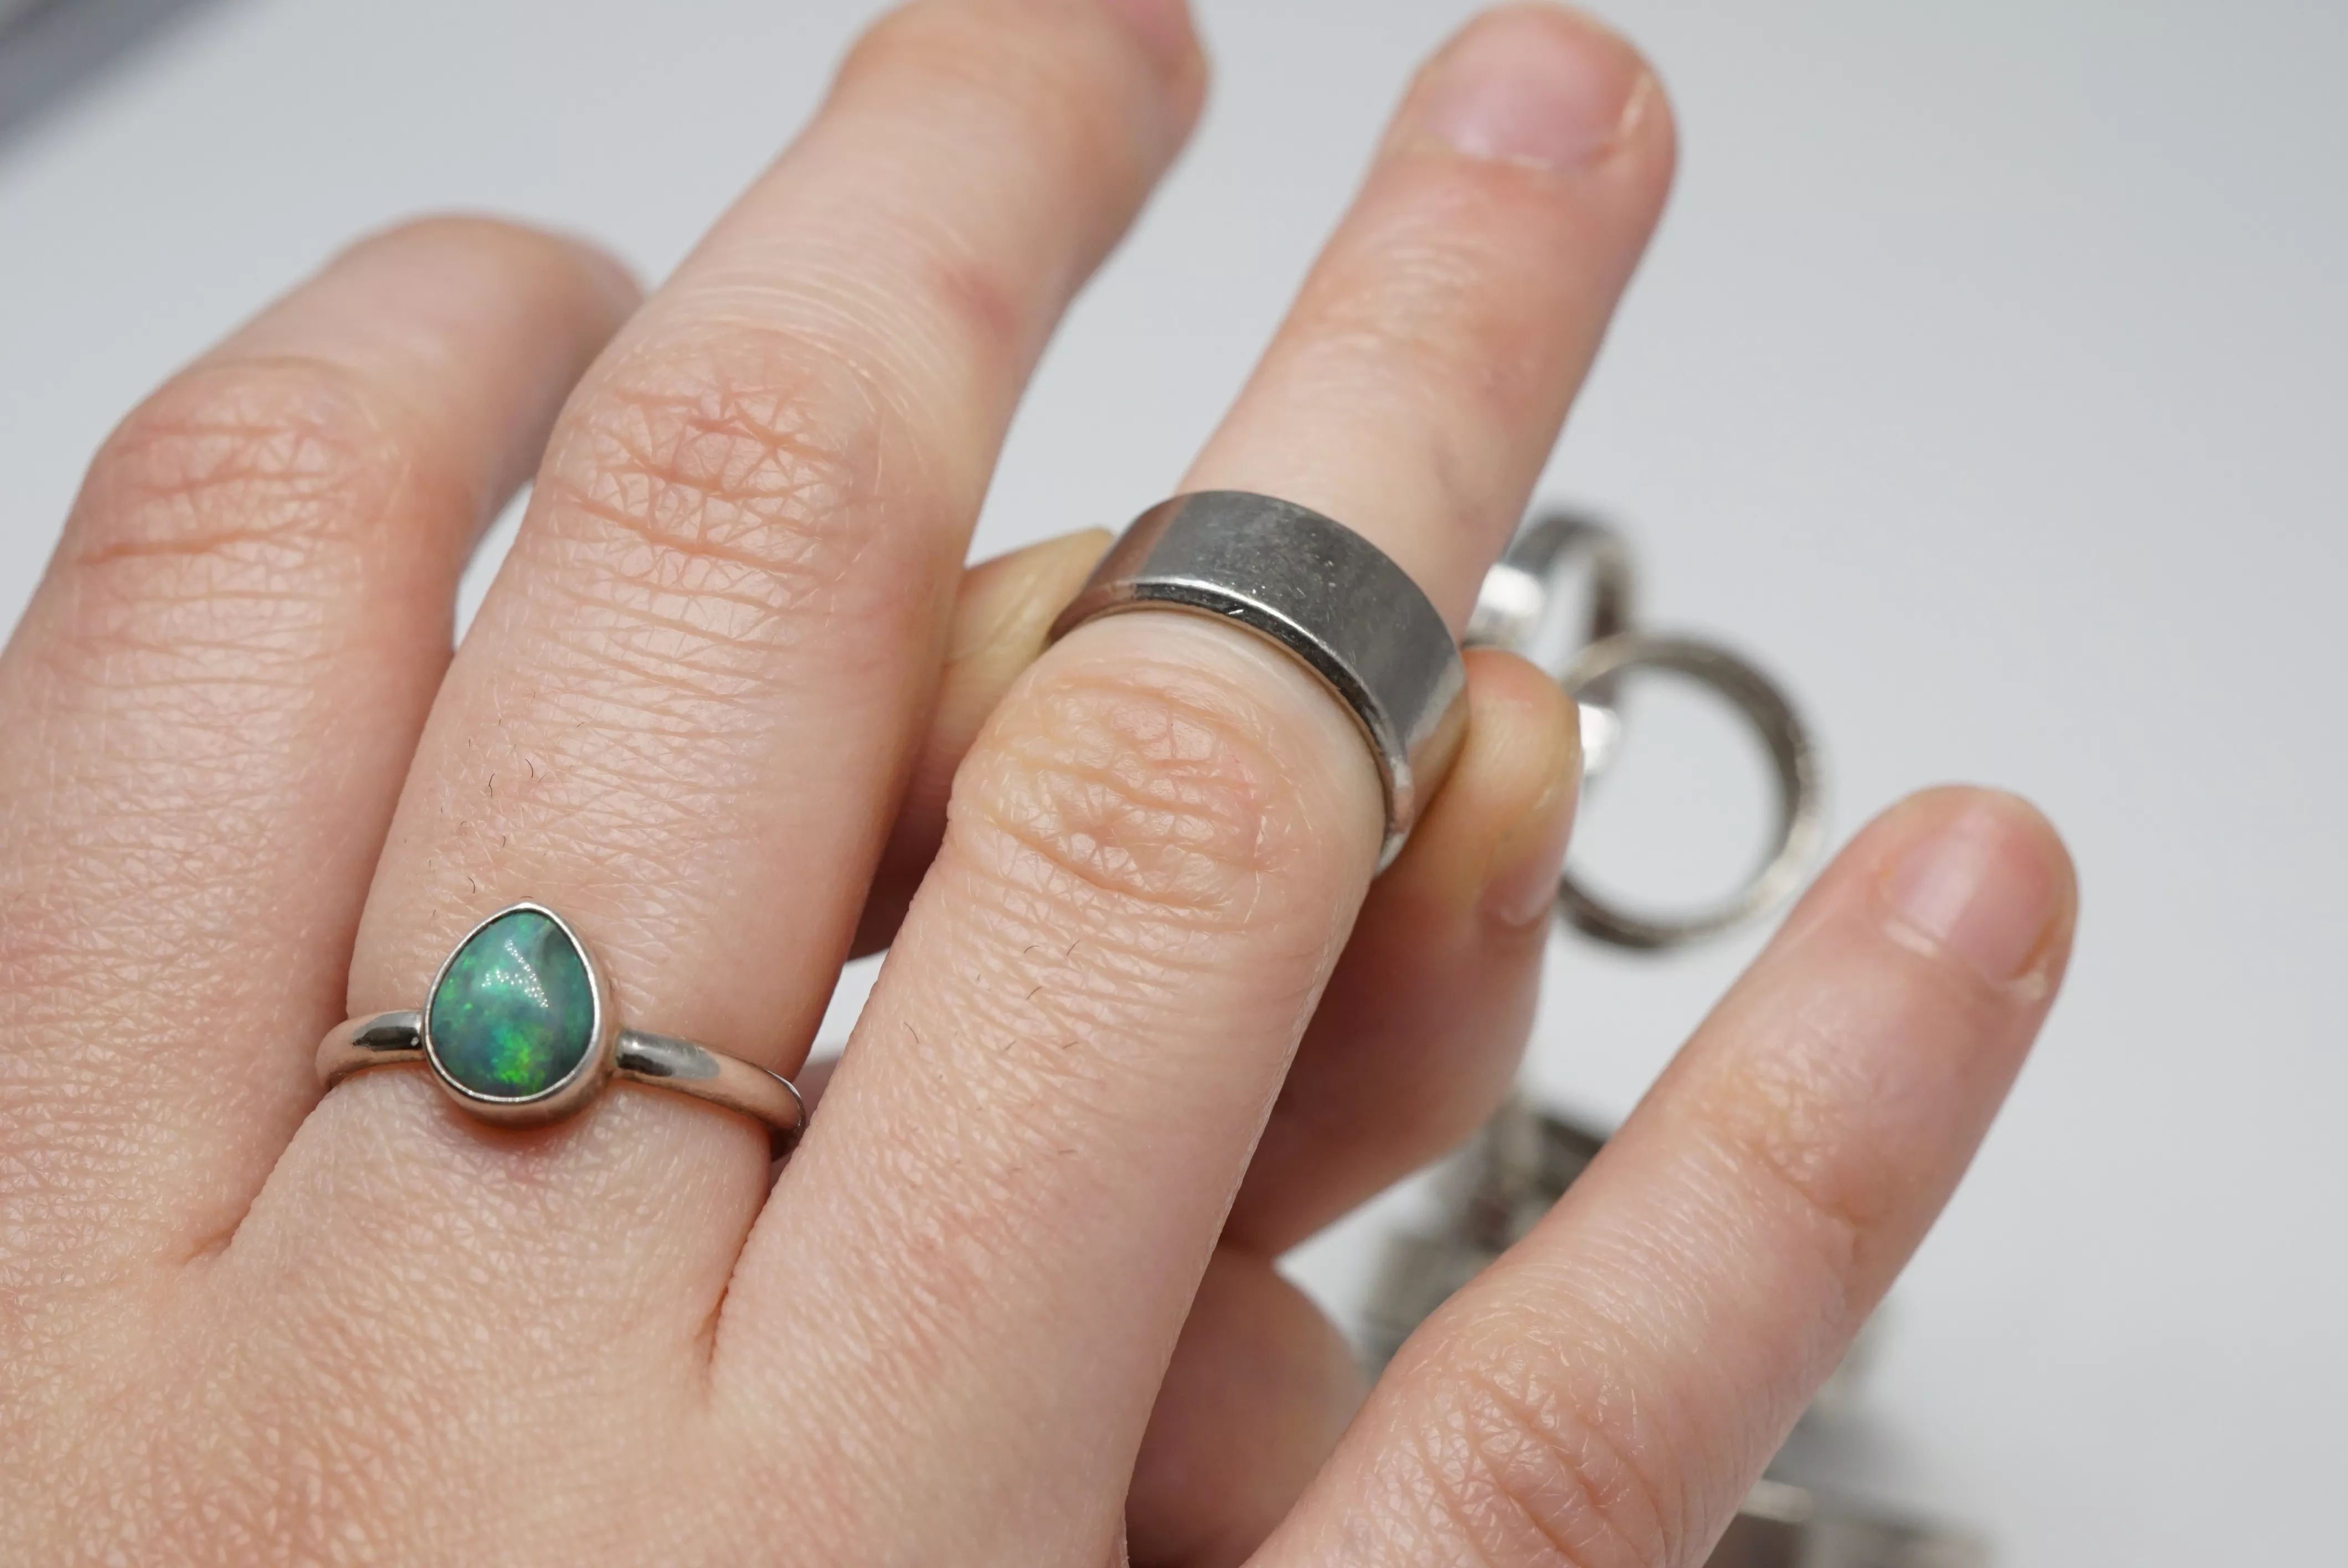 My ring is too big for my finger so it slides around but if I size it  smaller, it won't fit over my knuckle. What do I do? - Quora